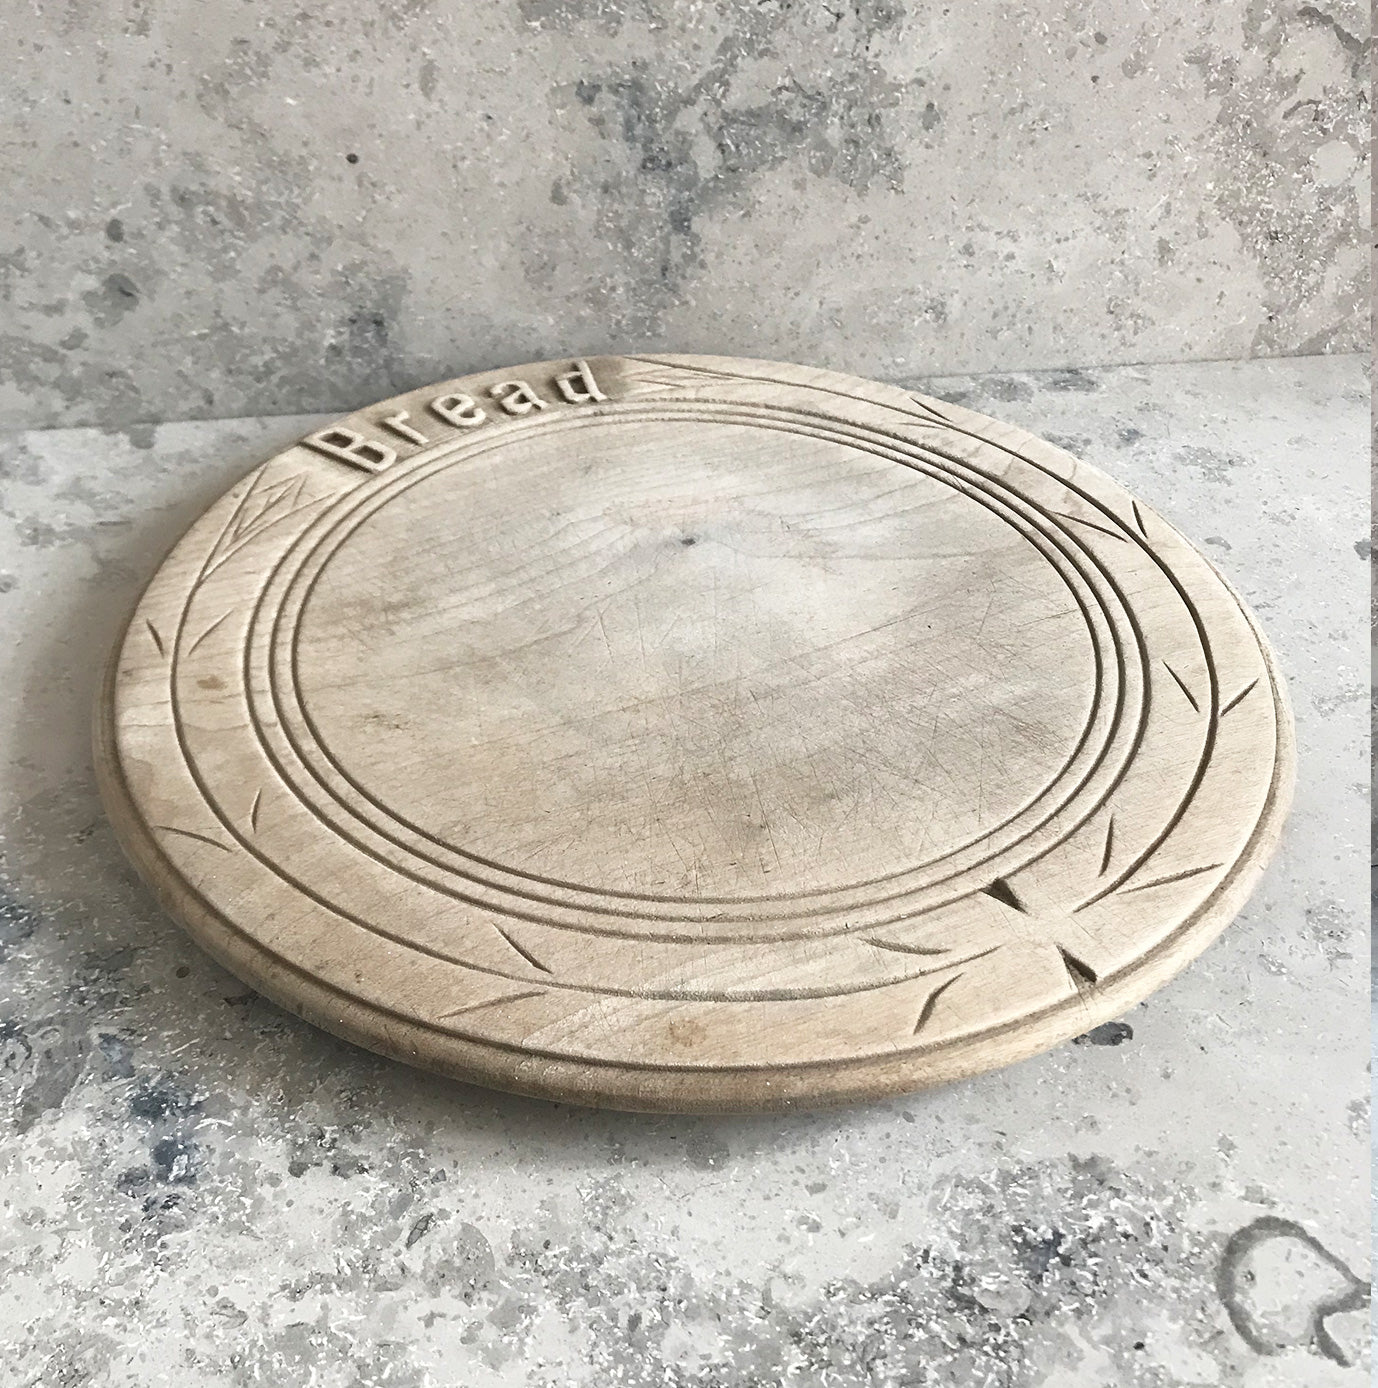 Neat mid 20th c breadboard with the word 'Bread' nice and sharply carved at the head of the board, with simple carved detail to the edge - SHOP NOW - www.intovintage.co.uk